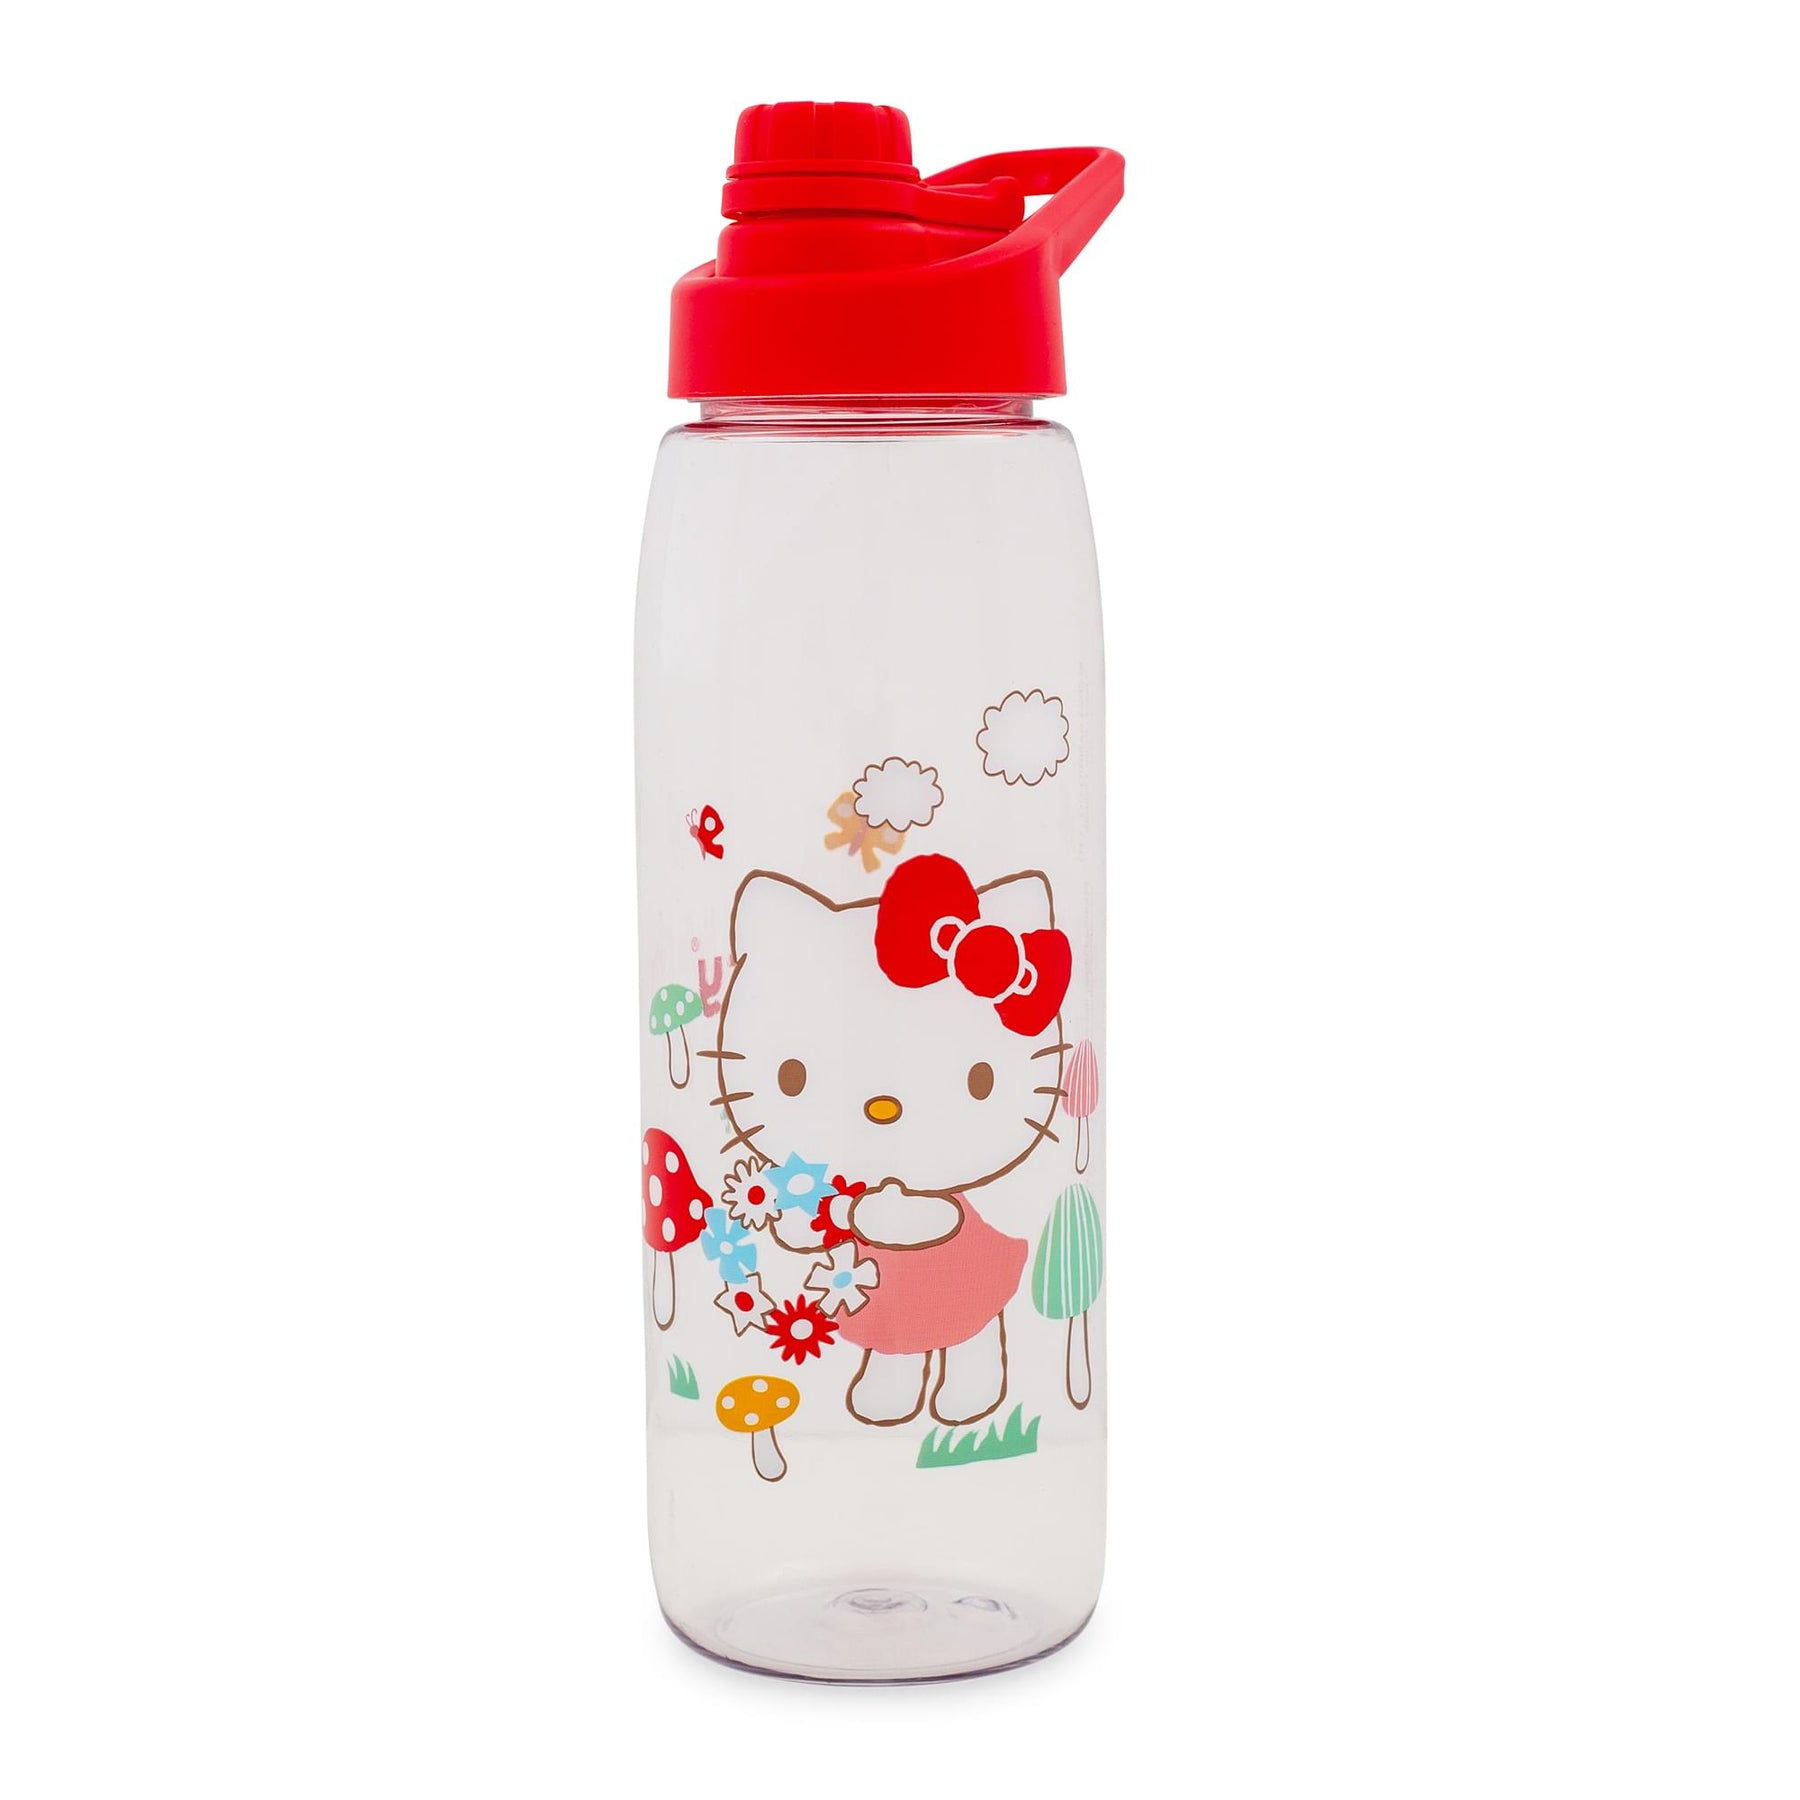 Sanrio Hello Kitty Mushrooms Water Bottle With Screw-Top Lid | Holds 28 Ounces